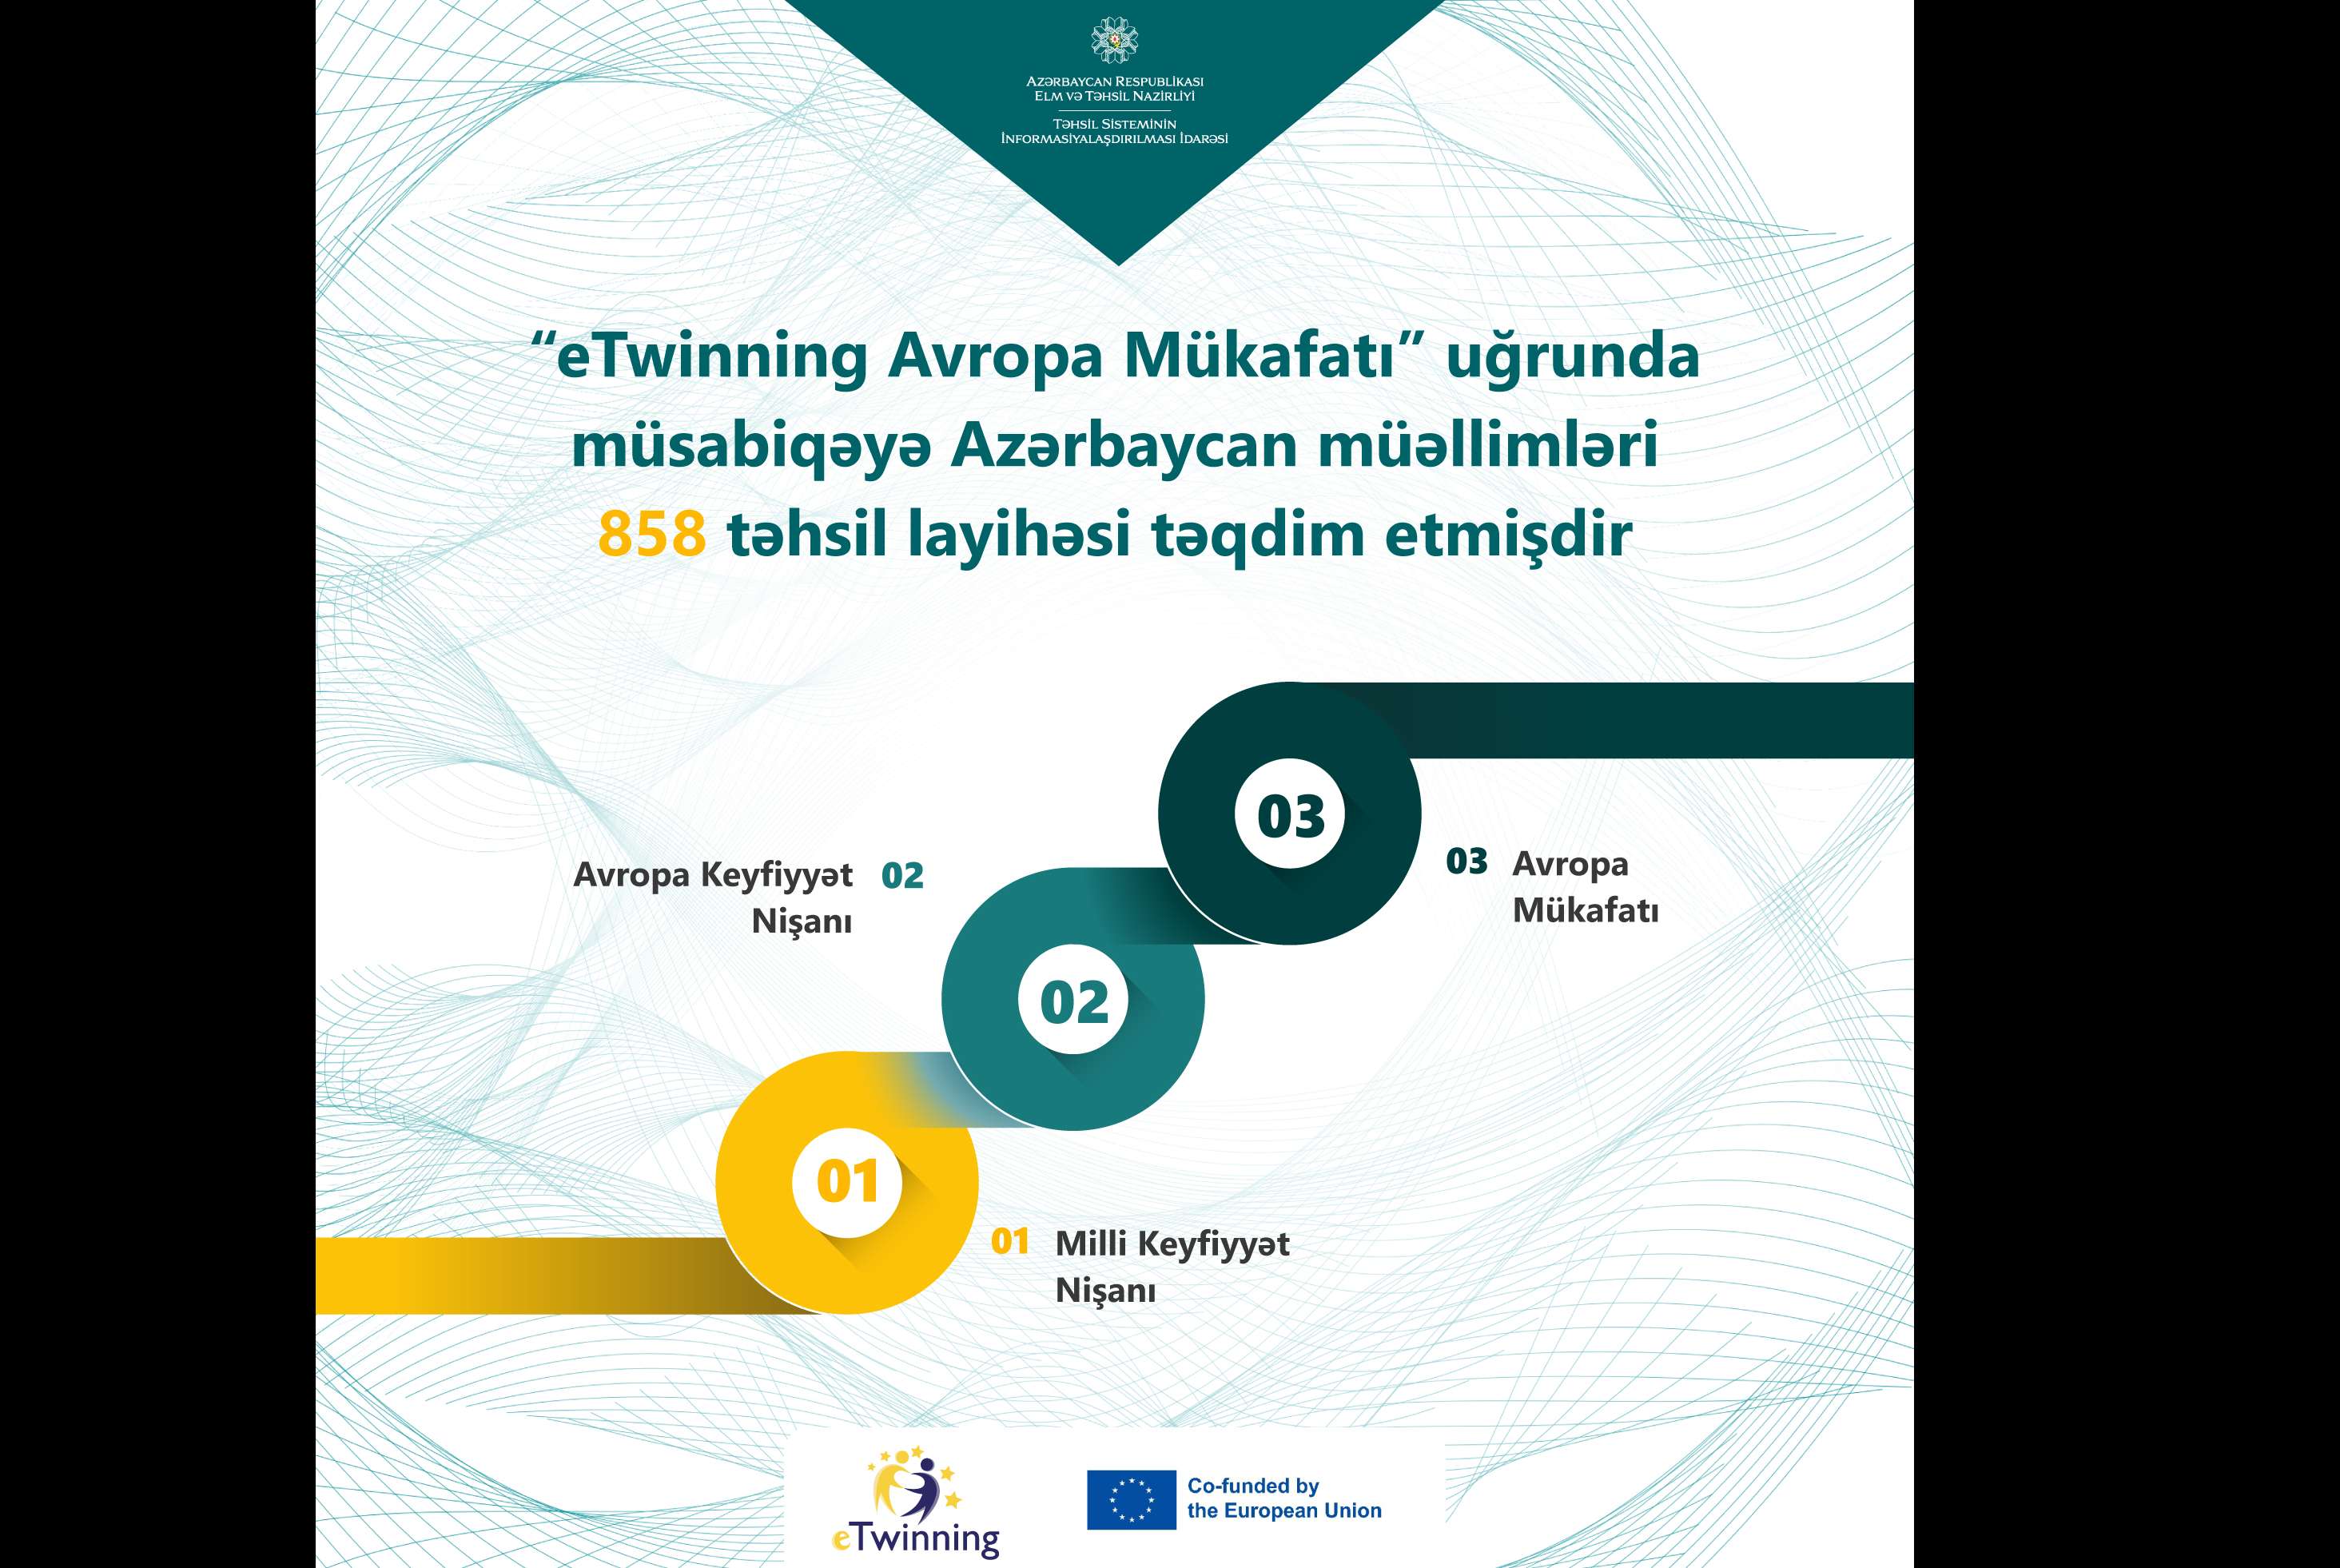 Azerbaijani teachers submitted 858 educational projects for the "eTwinning European Award".